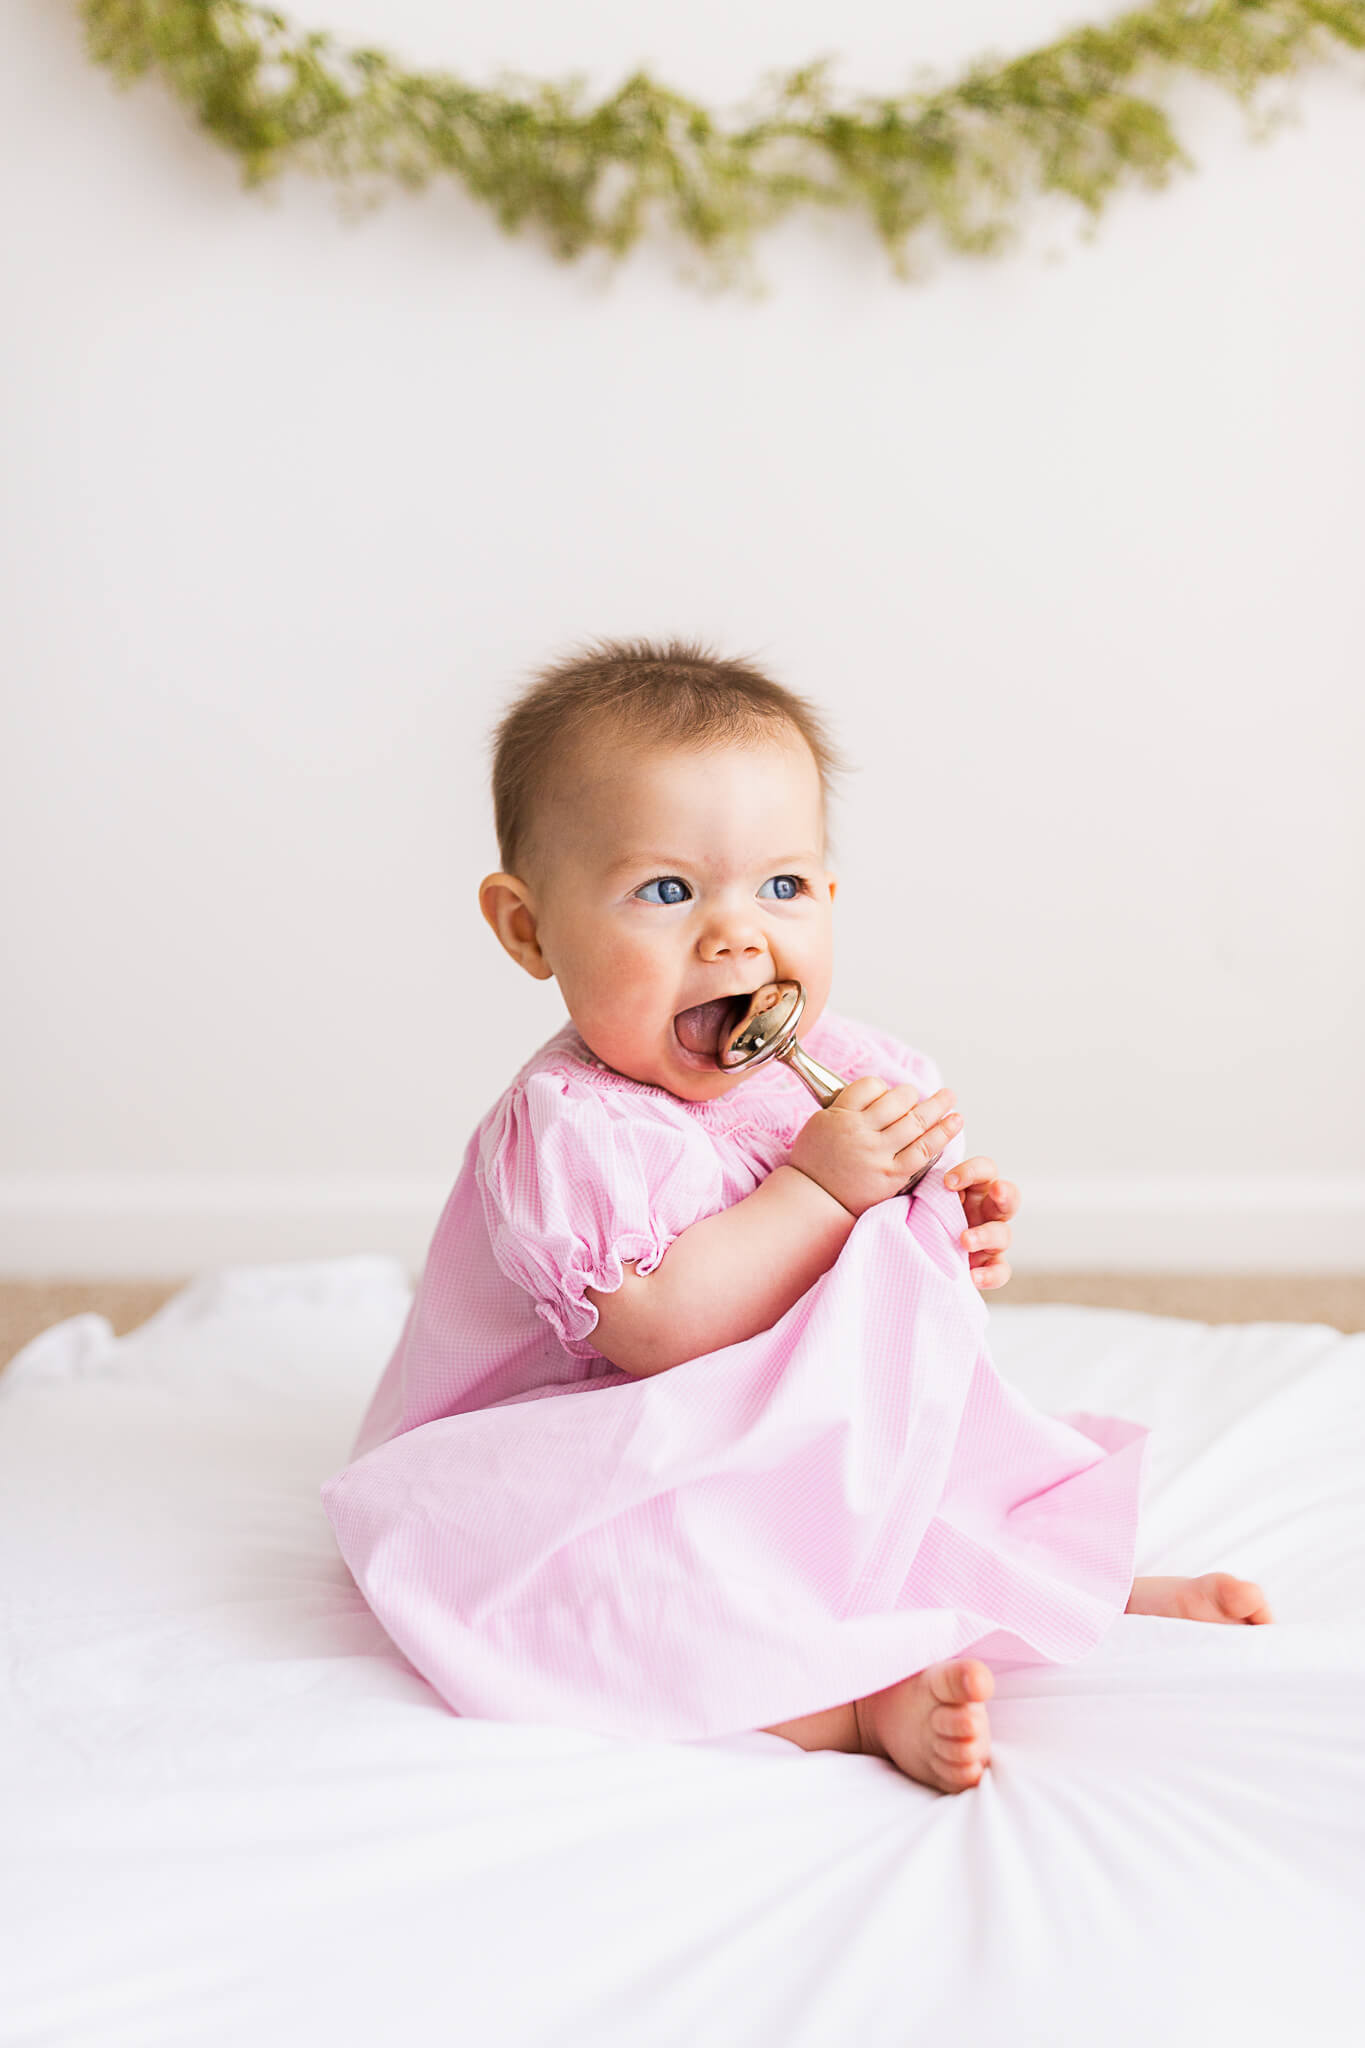 Toddler in a pink dress chews on a rattle toy in a studio Marlee Jane's